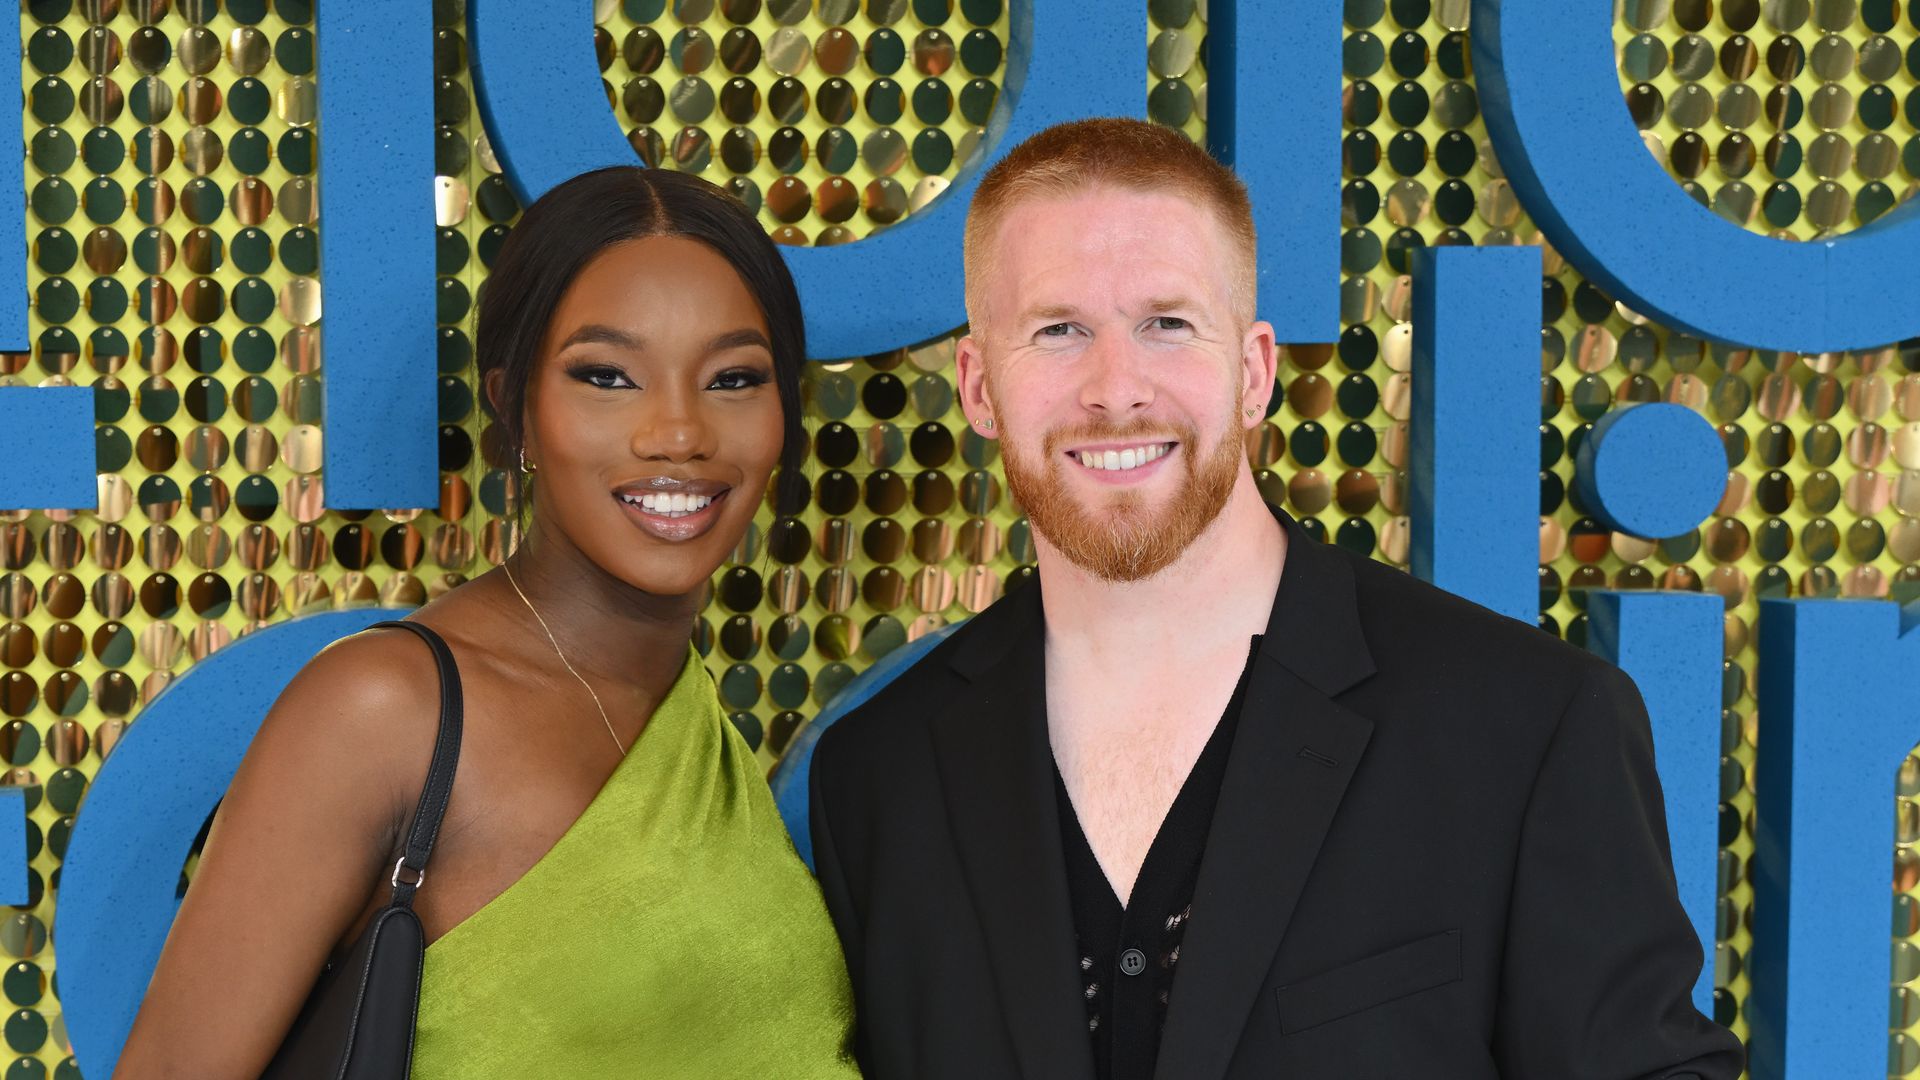 Chyna Mills in green and Neil Jones in black at premiere